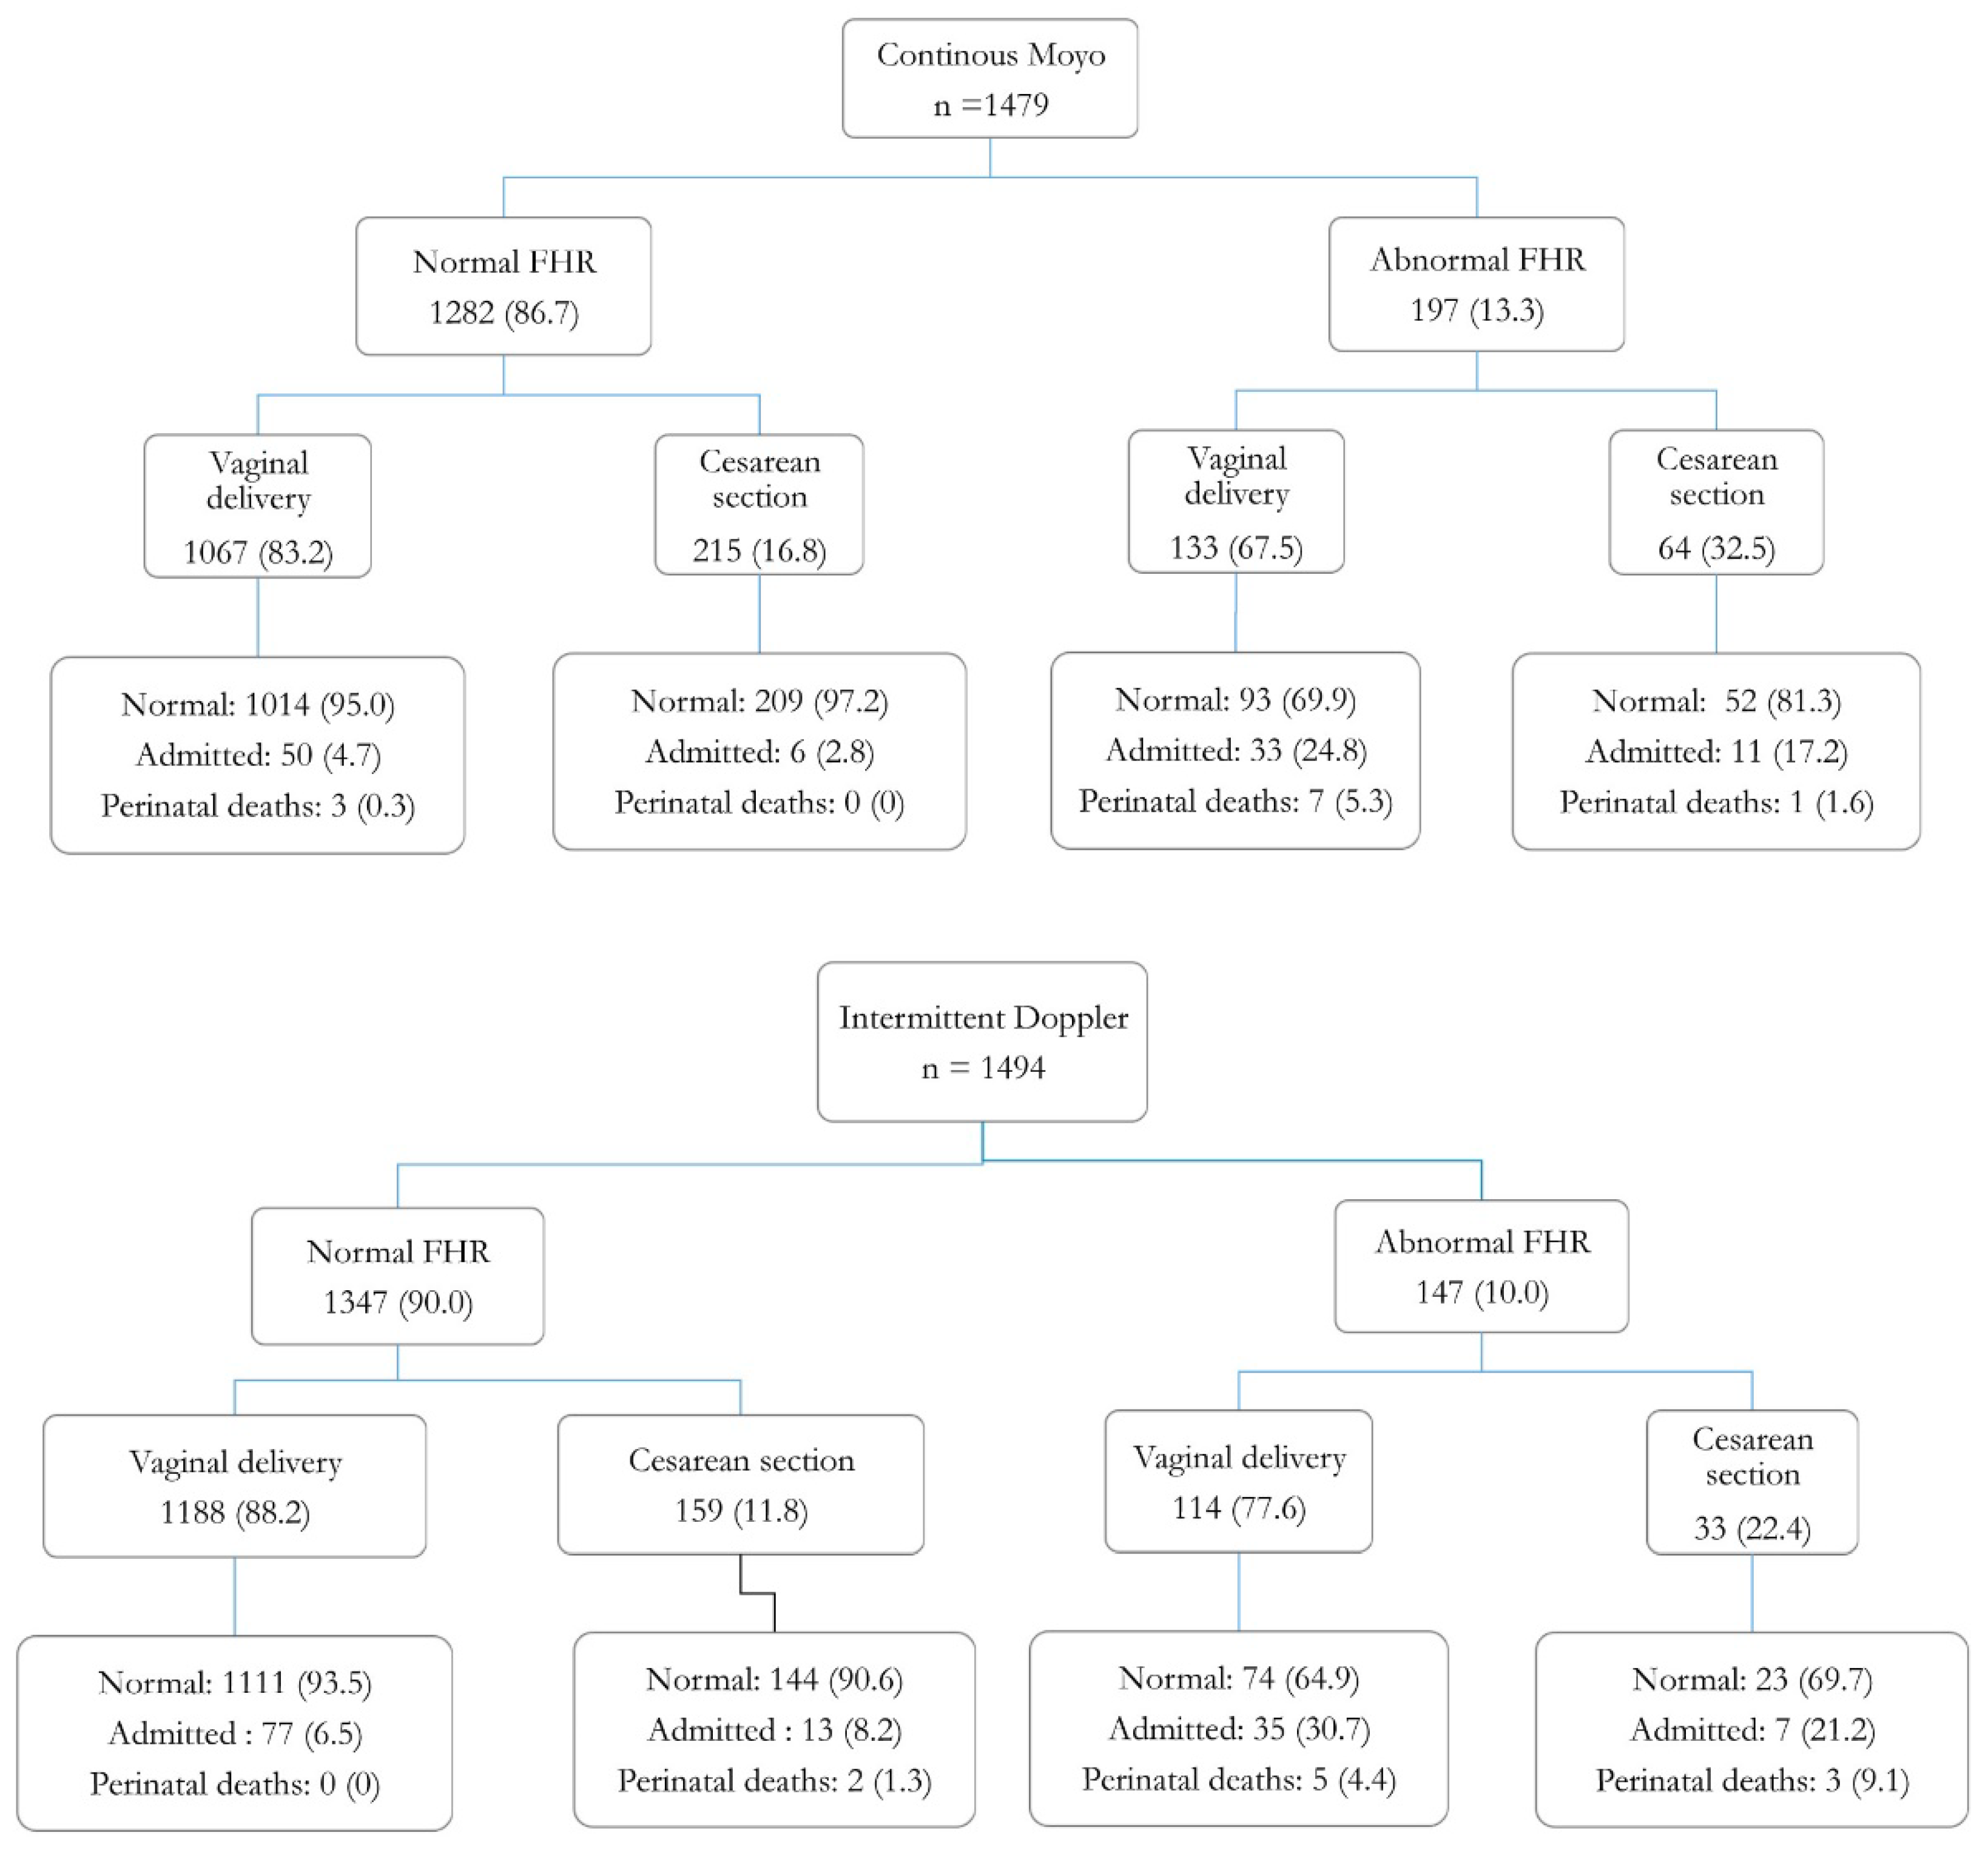 Ijerph Free Full Text Effectiveness Of A Novel Continuous Doppler Moyo Versus Intermittent Doppler In Intrapartum Detection Of Abnormal Foetal Heart Rate A Randomised Controlled Study In Tanzania Html